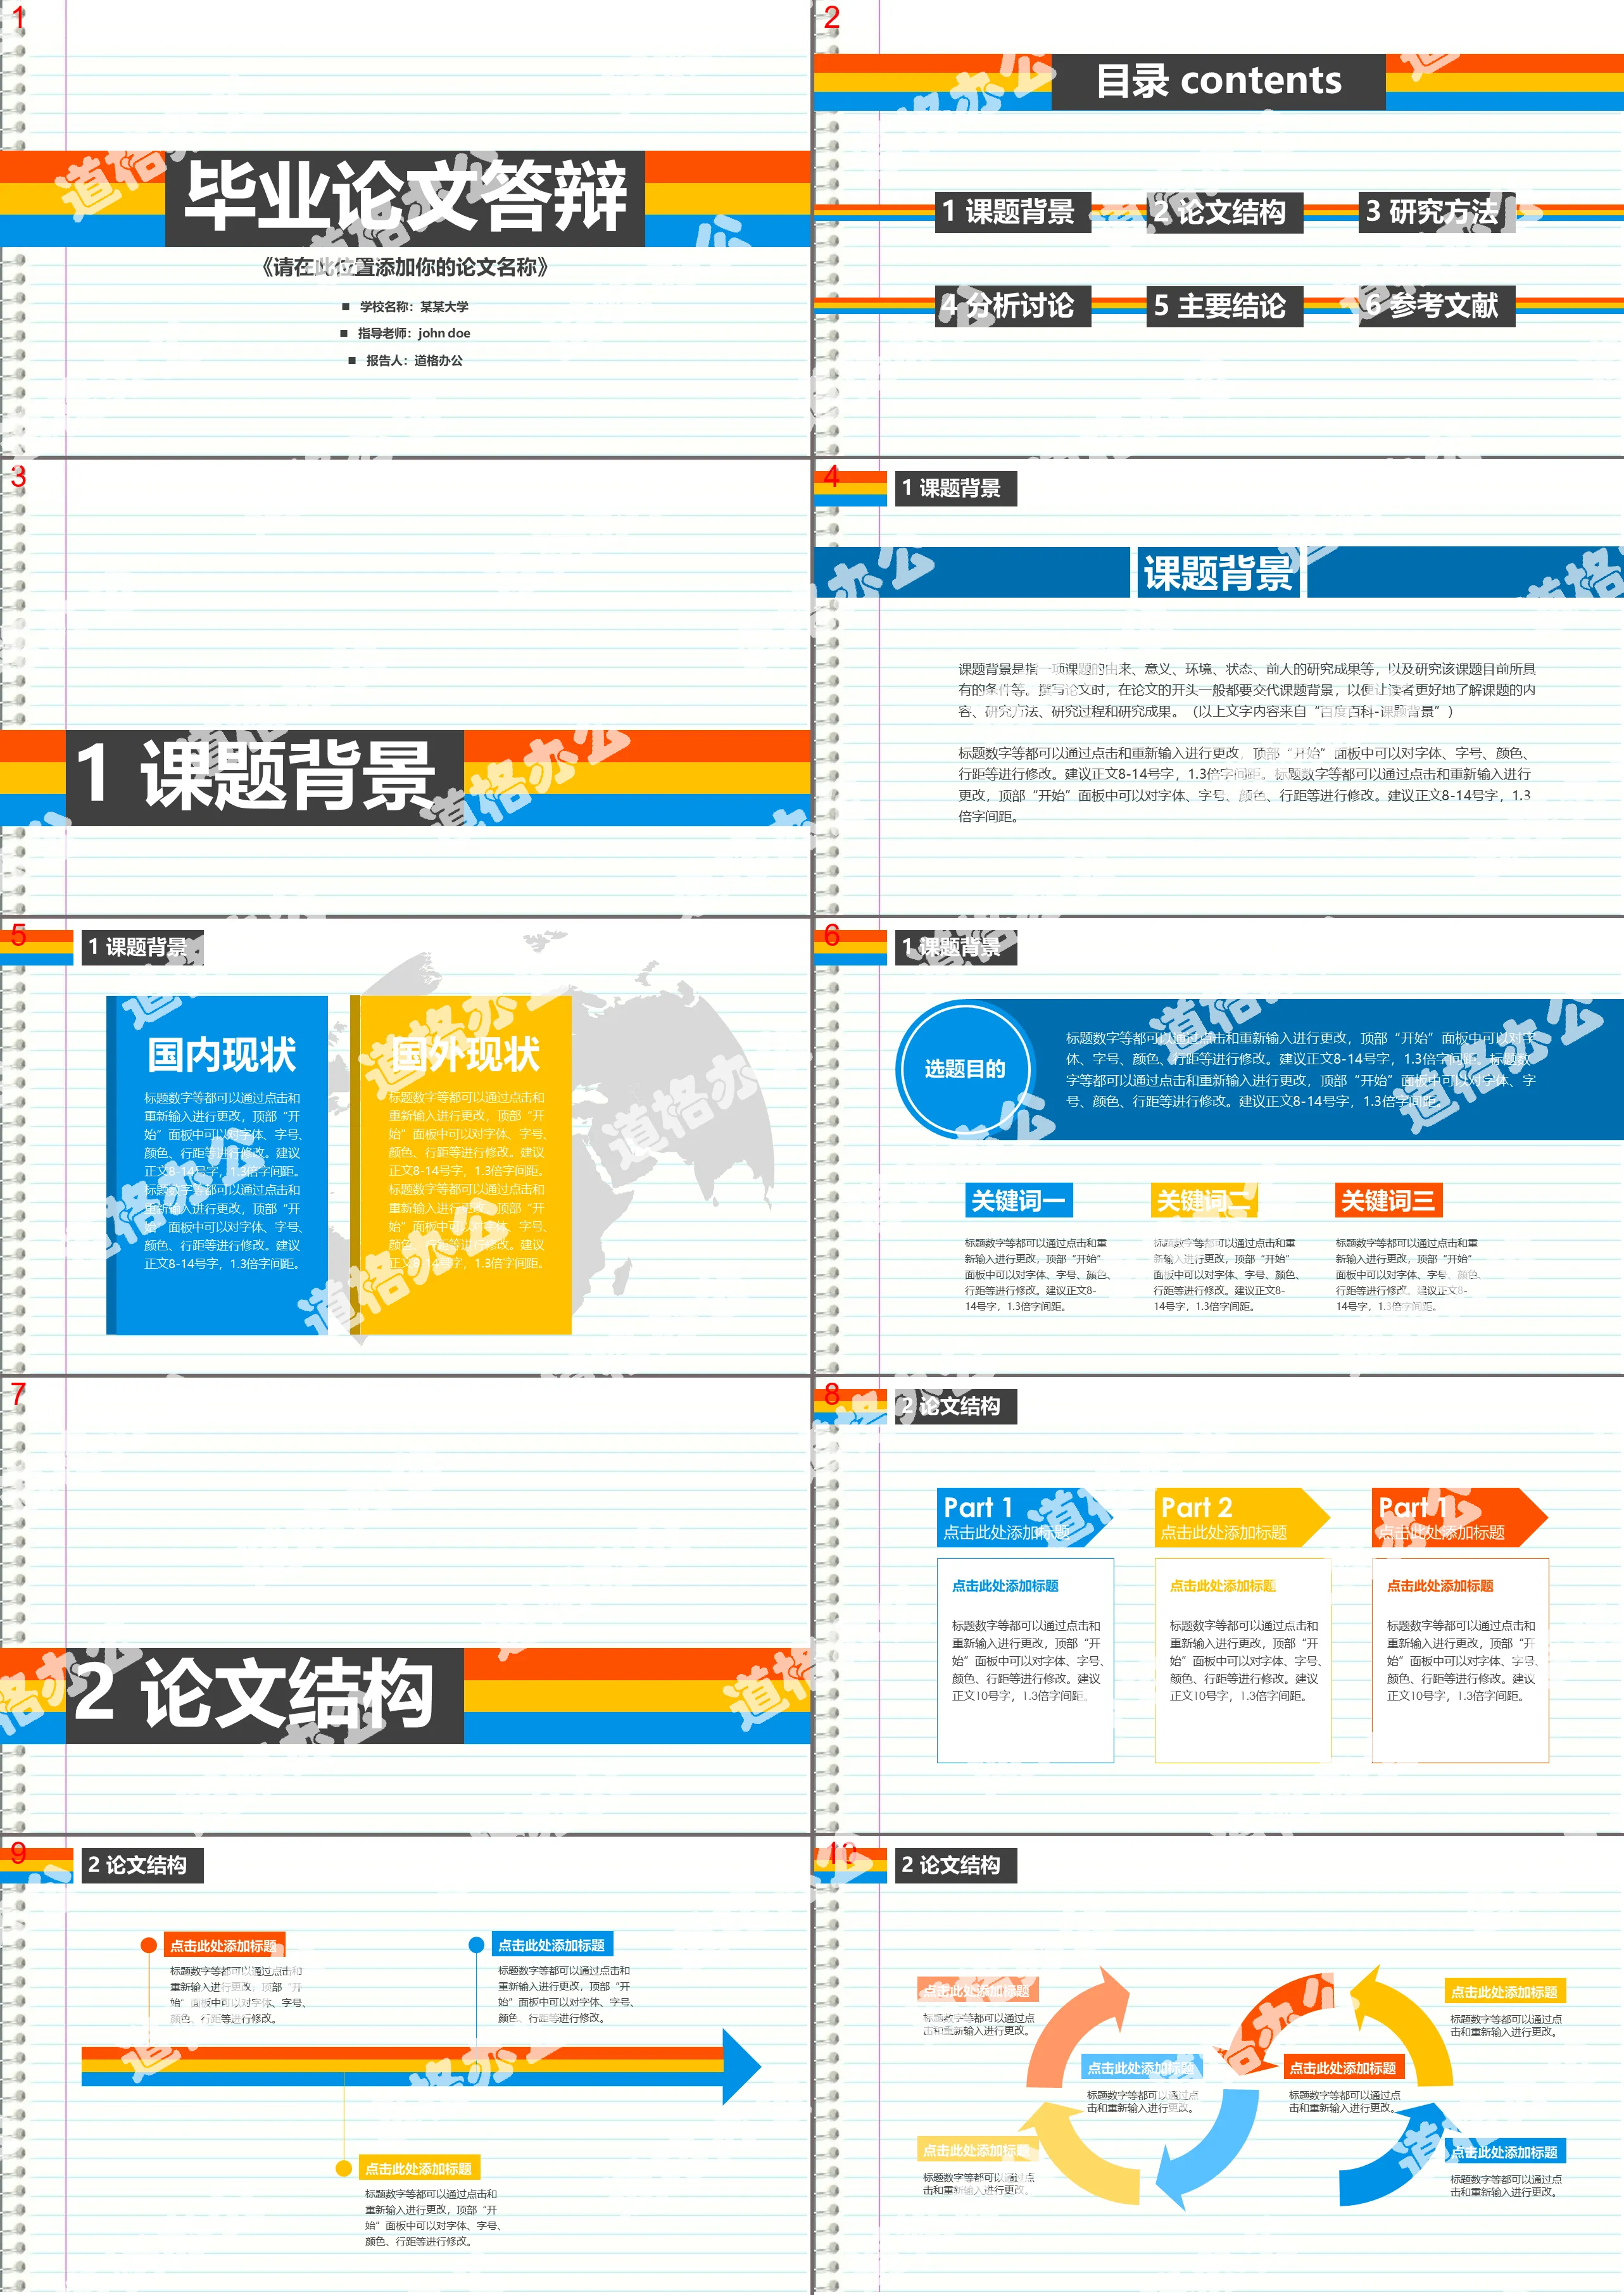 Master graduation defense PPT template in color notepad style